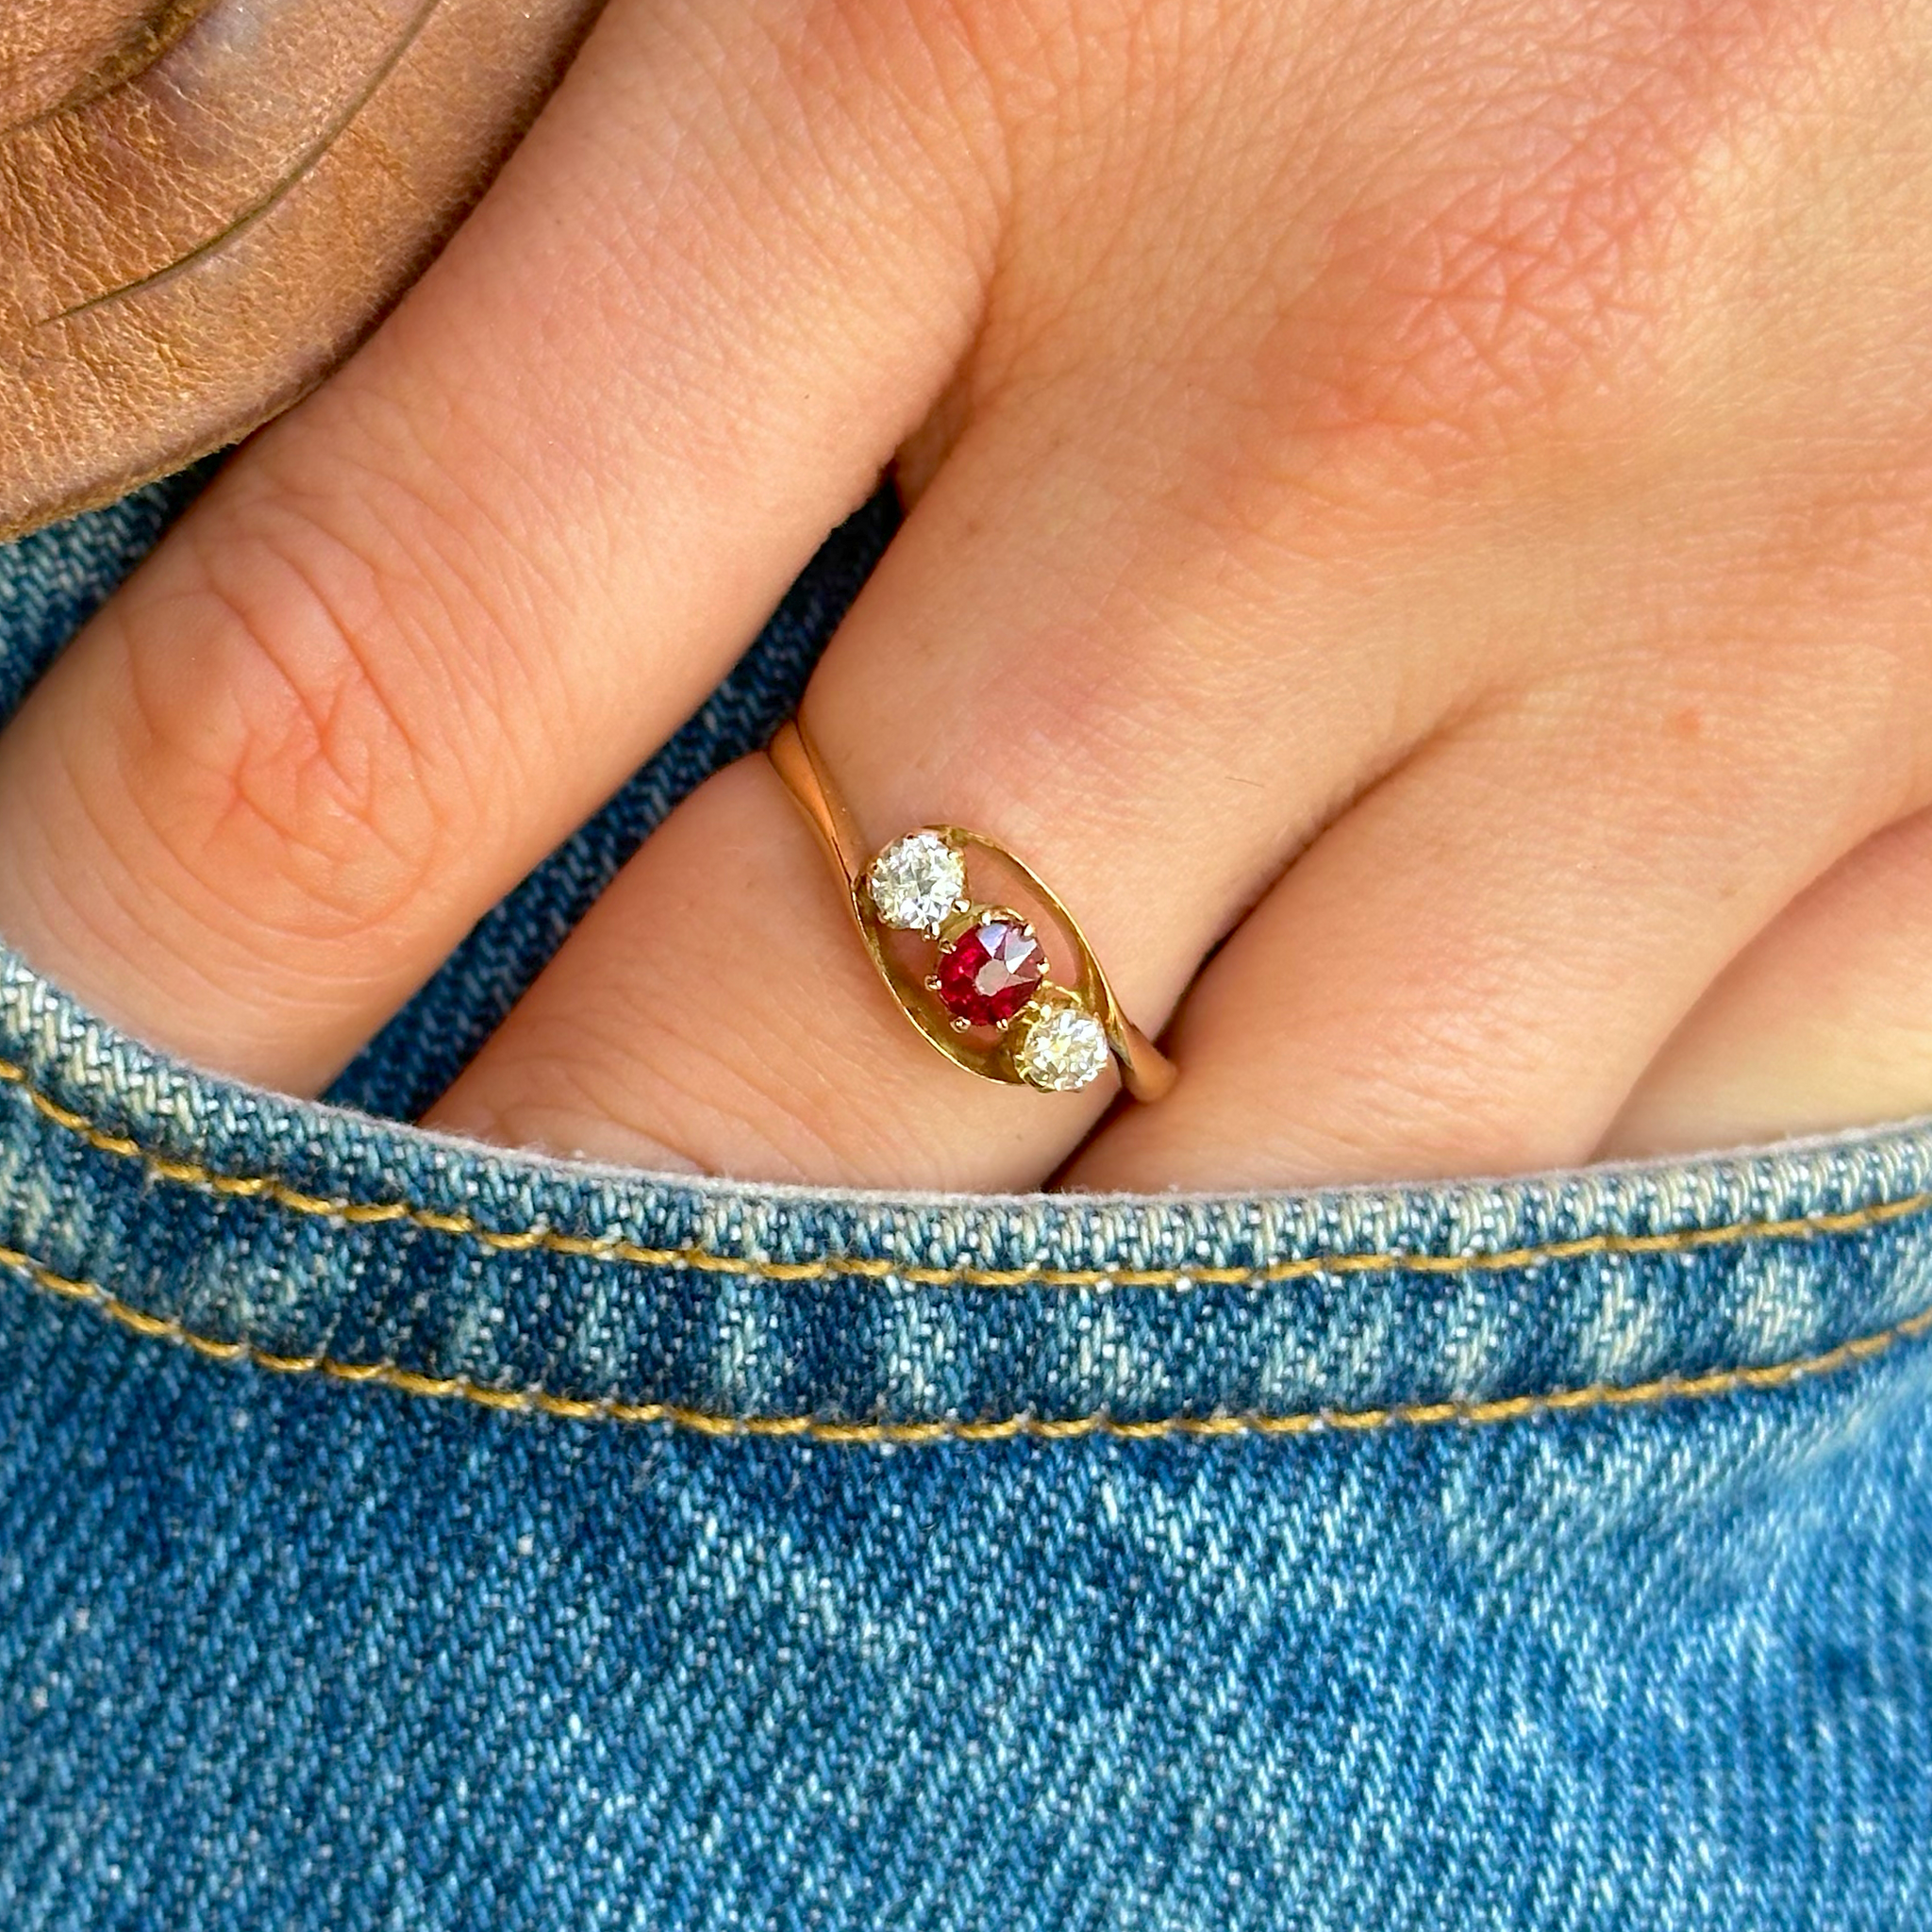 Antique, Three-Stone Ruby and Diamond Engagement Ring, 18ct Yellow Gold worn on hand in pocket of jeans